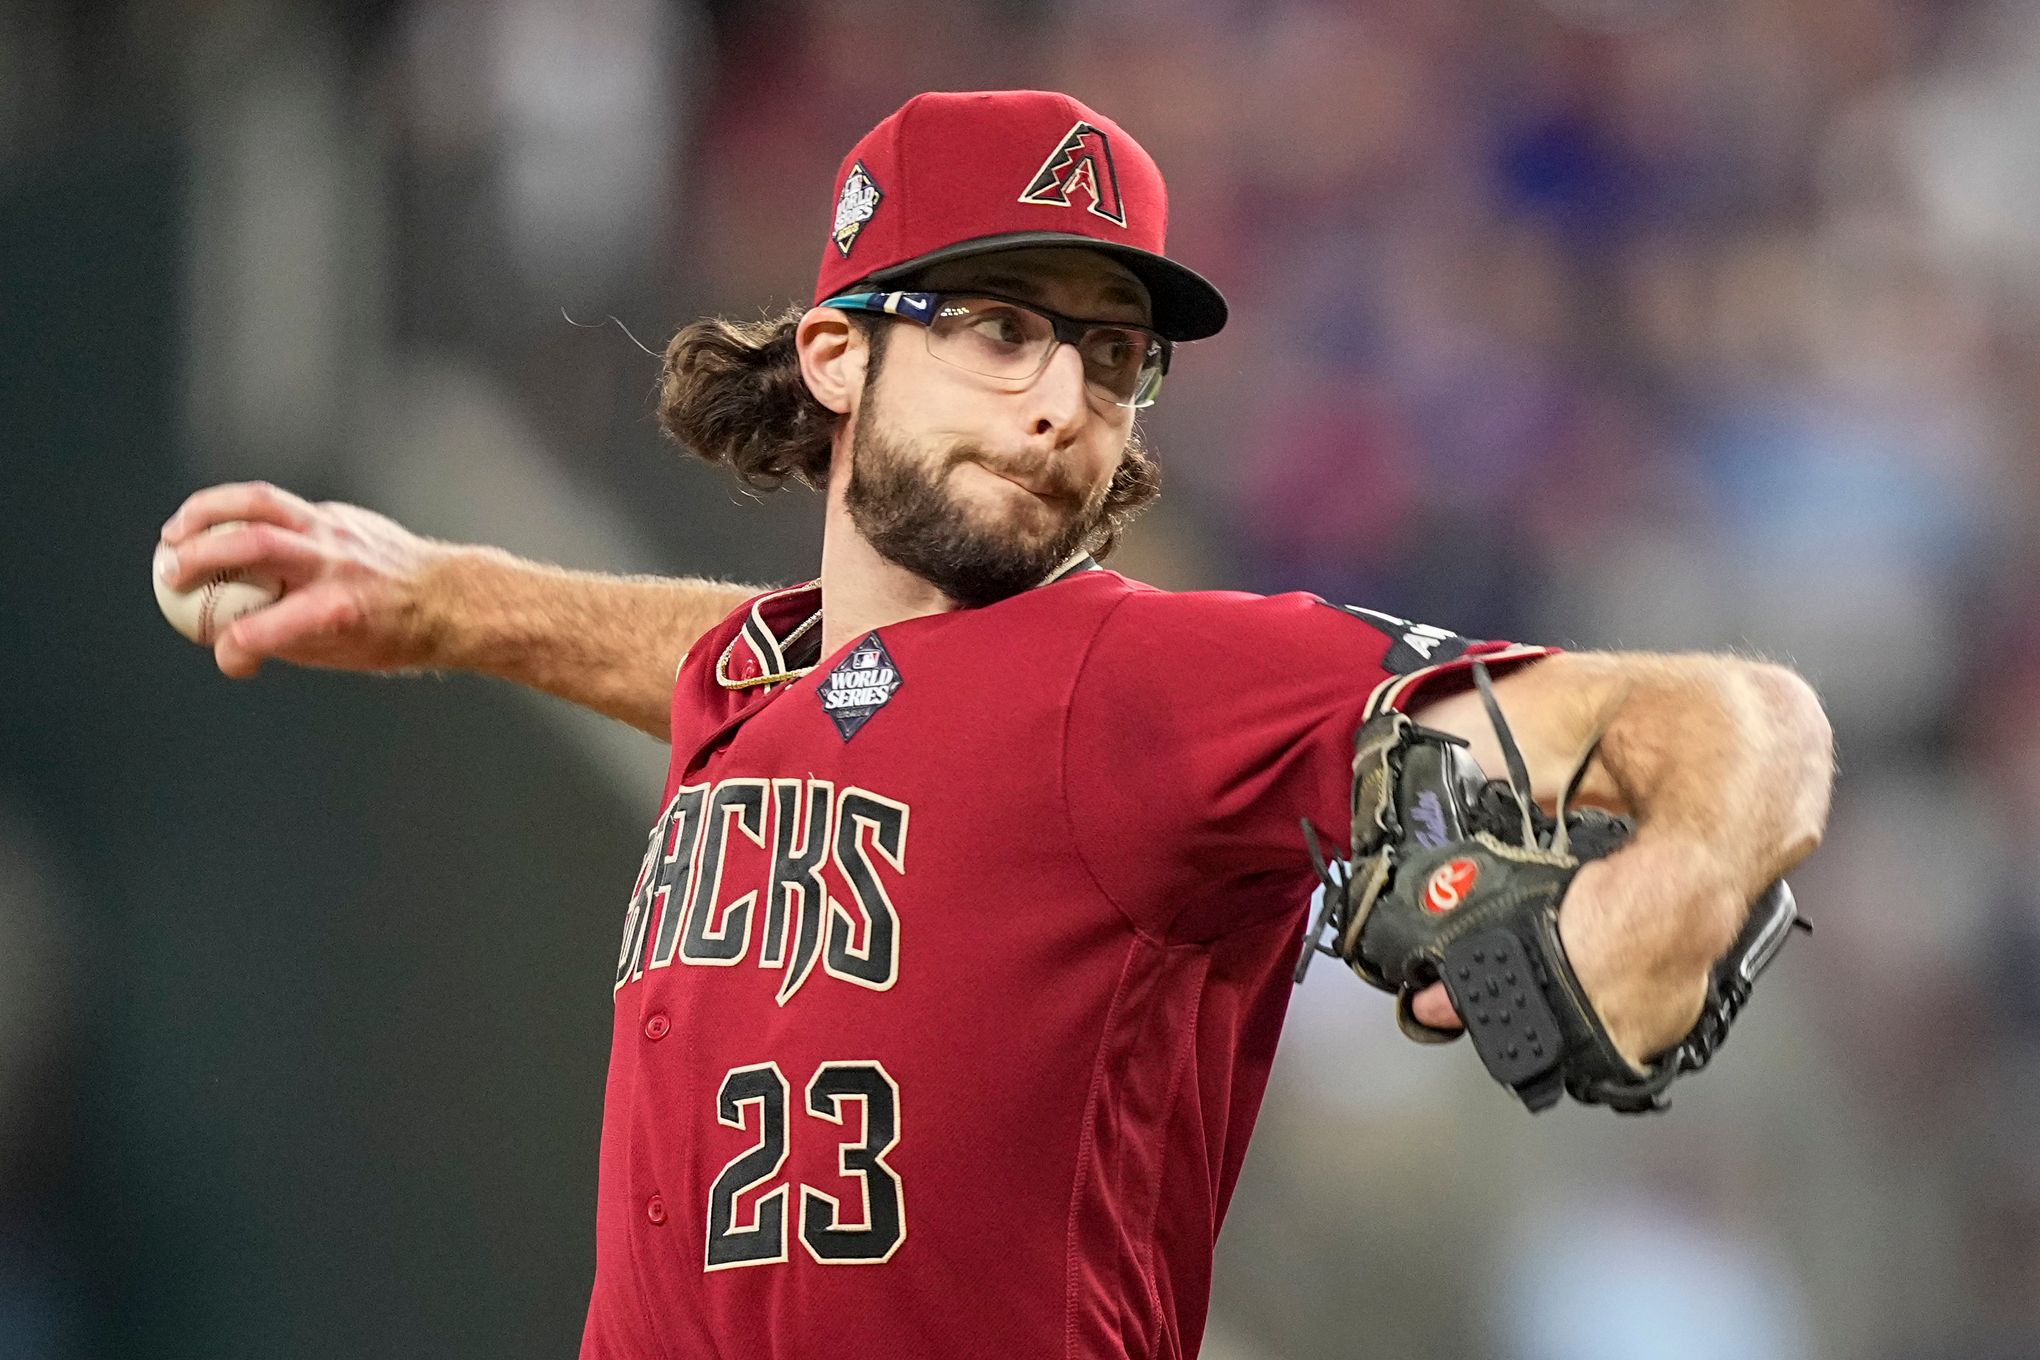 Facing elimination in World Series, D-backs need All-Star